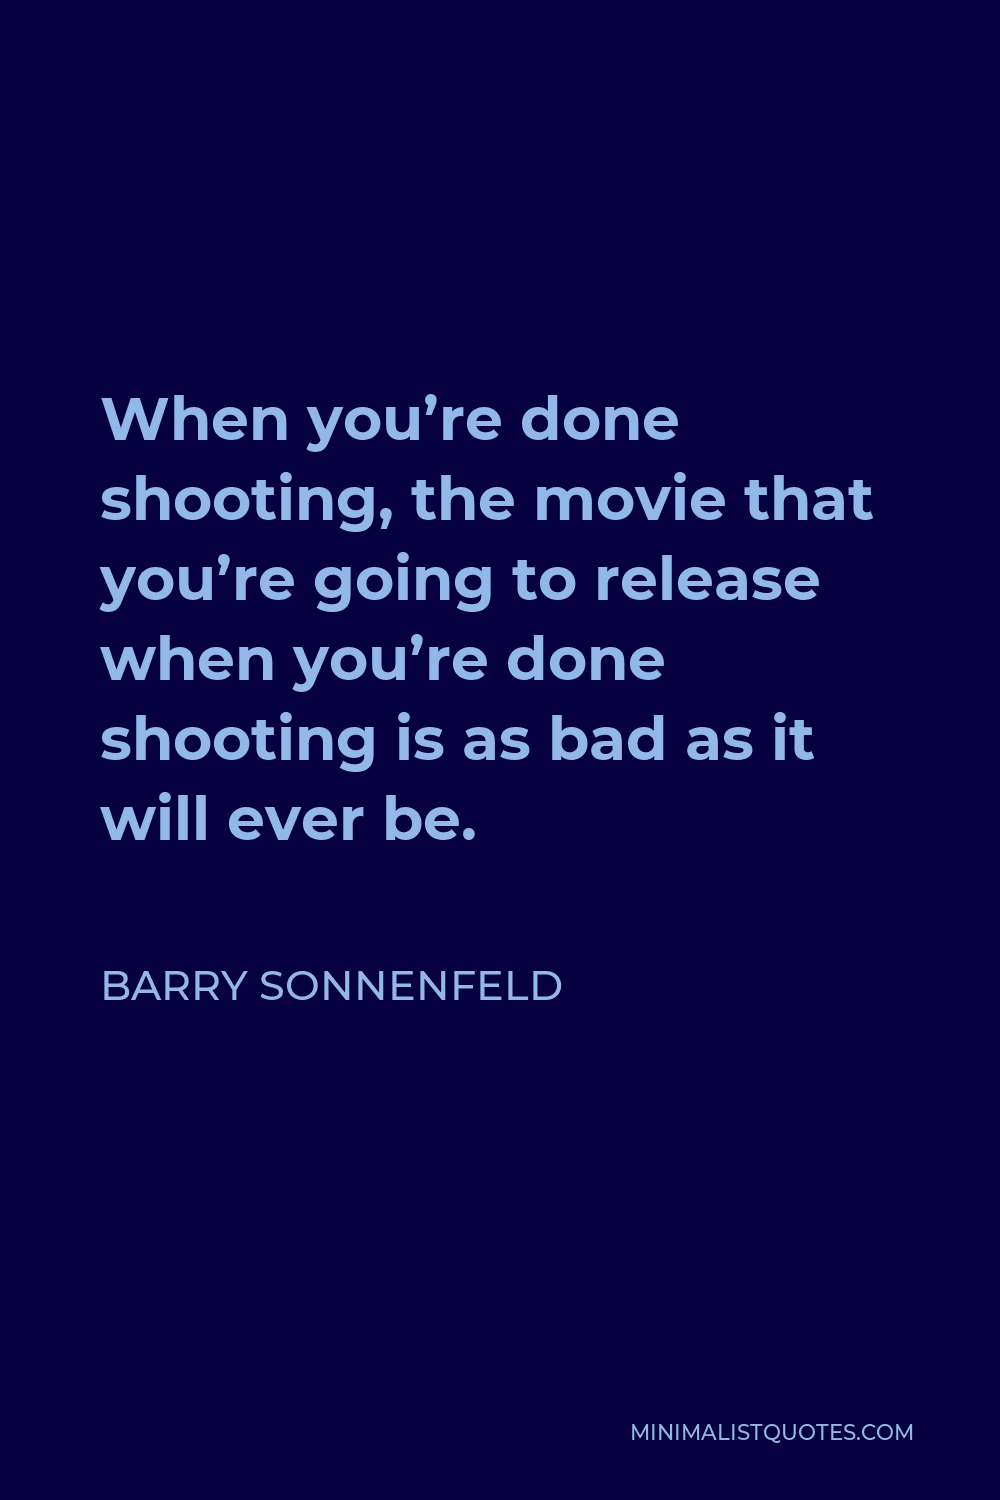 Barry Sonnenfeld Quote - When you’re done shooting, the movie that you’re going to release when you’re done shooting is as bad as it will ever be.